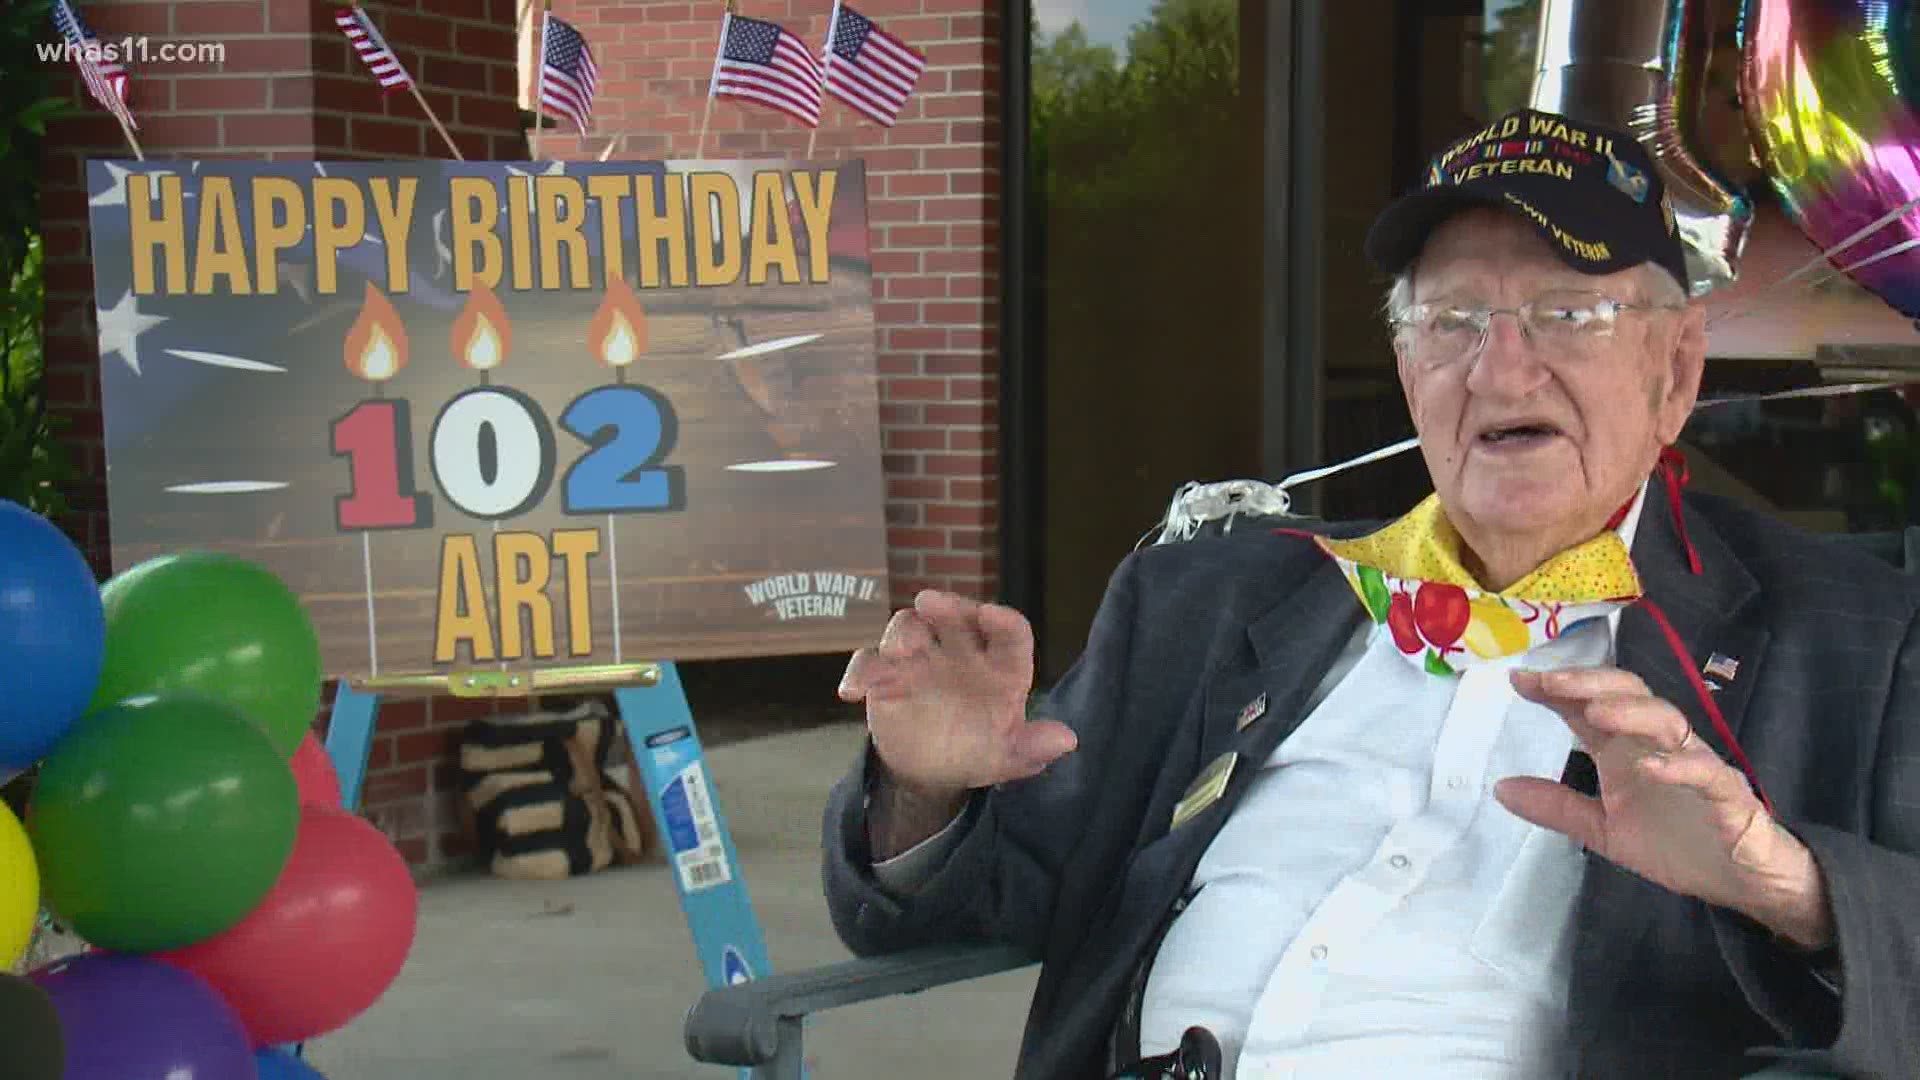 Family and friends of a World War II veteran Art made his birthday party one to remember while following all the COVID-19 coronavirus safety guidelines.